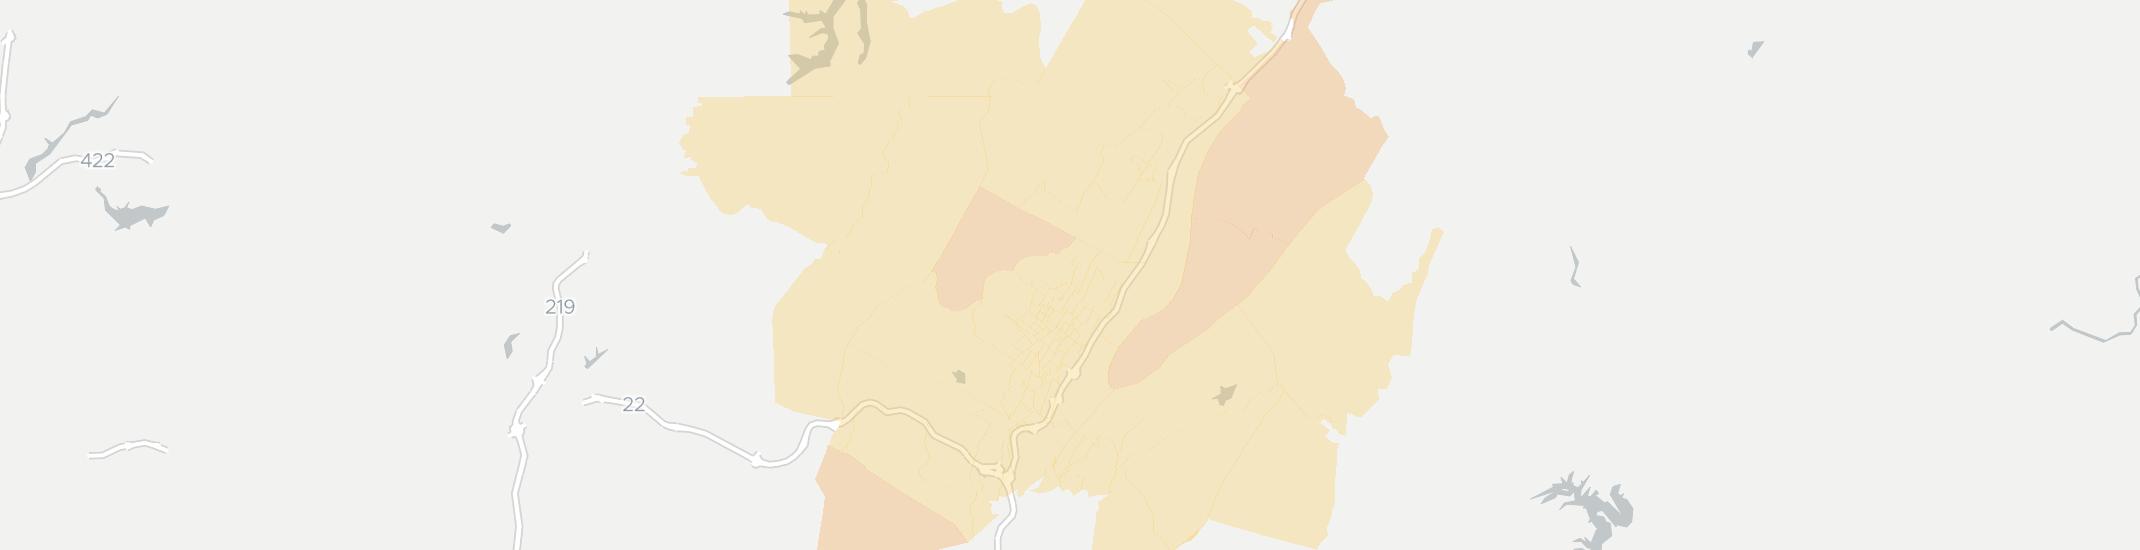 Altoona Internet Competition Map. Click for interactive map